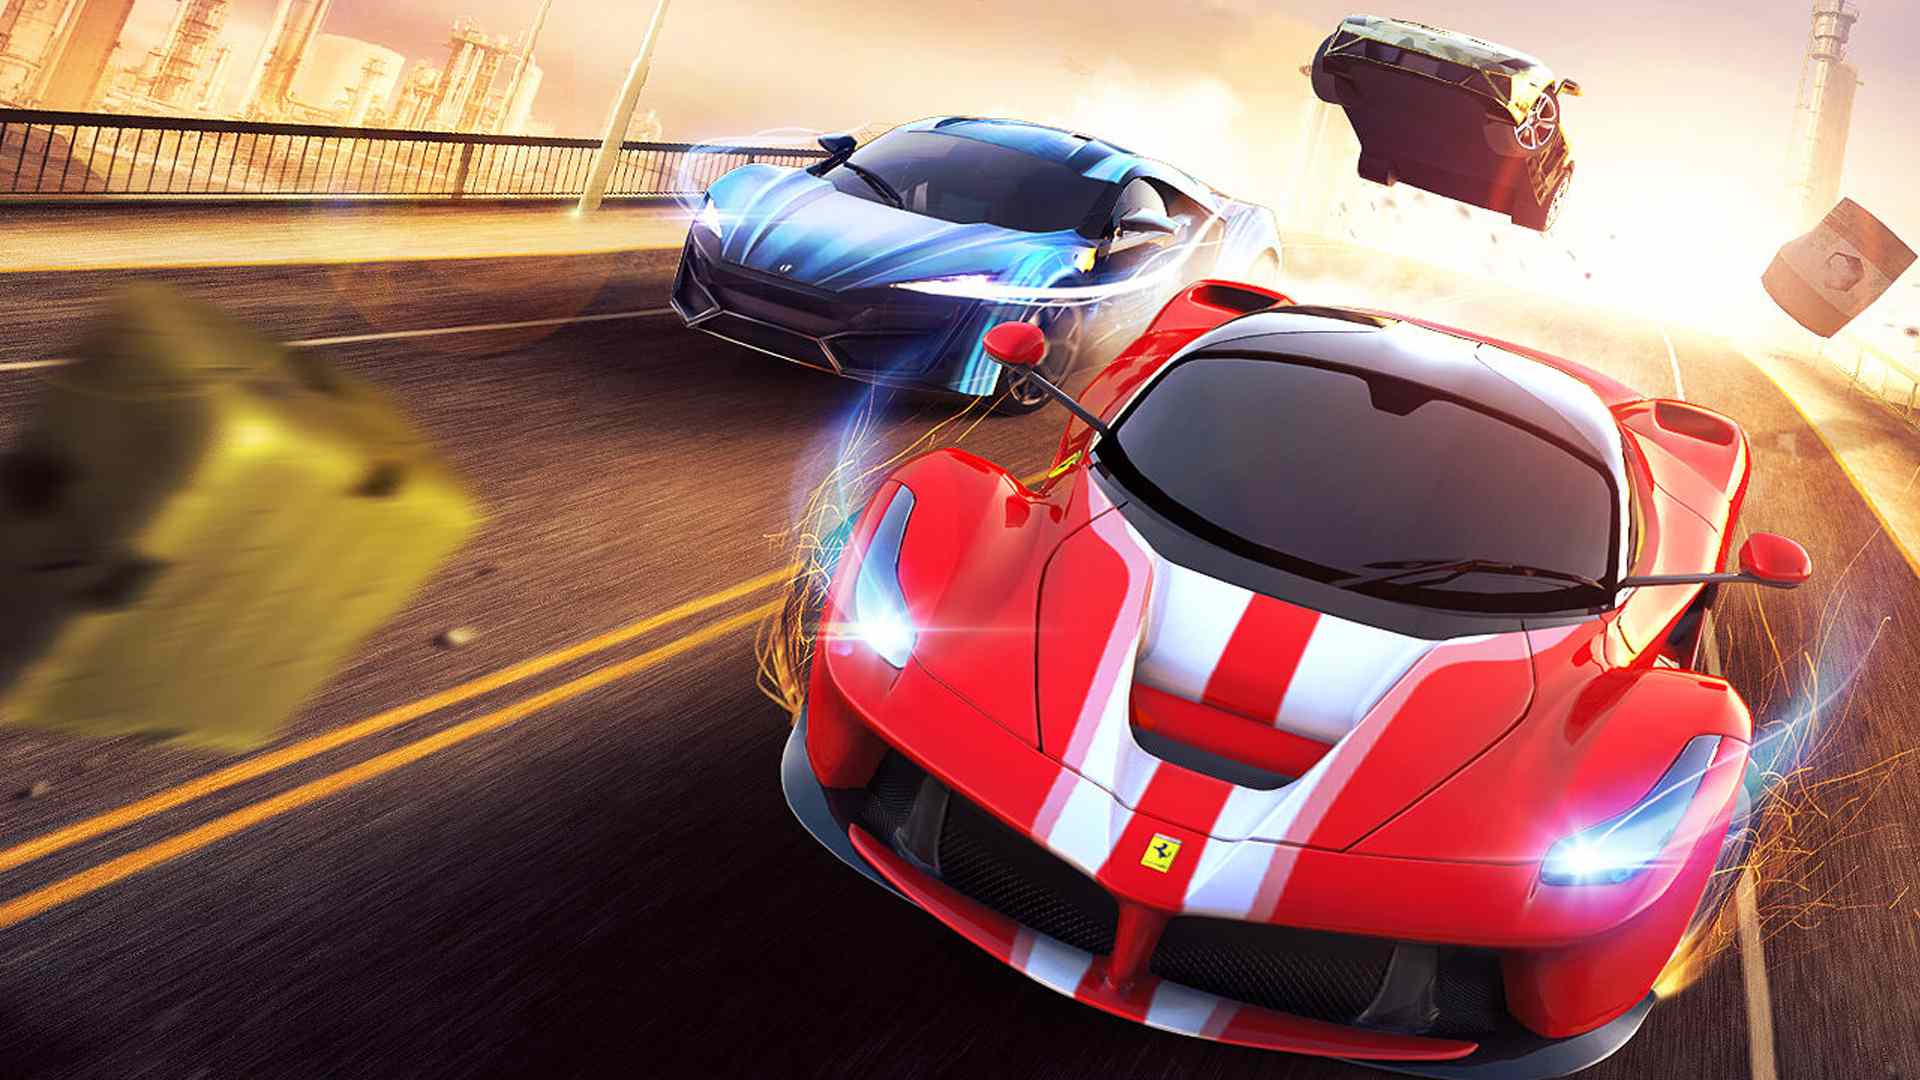 play free car racing games online without downloading